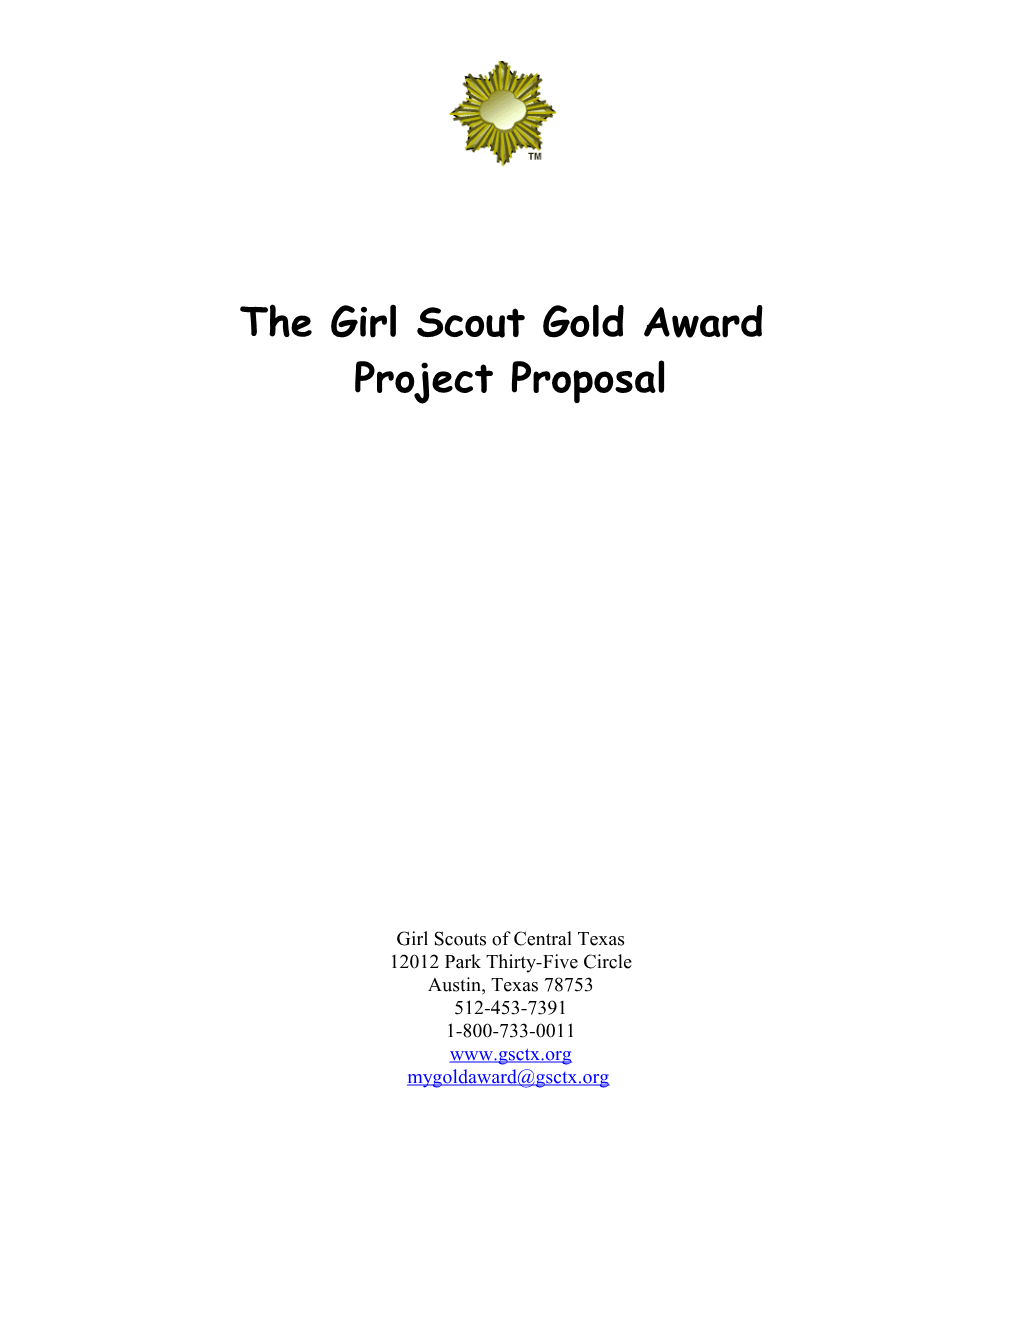 The Girl Scout Gold Award